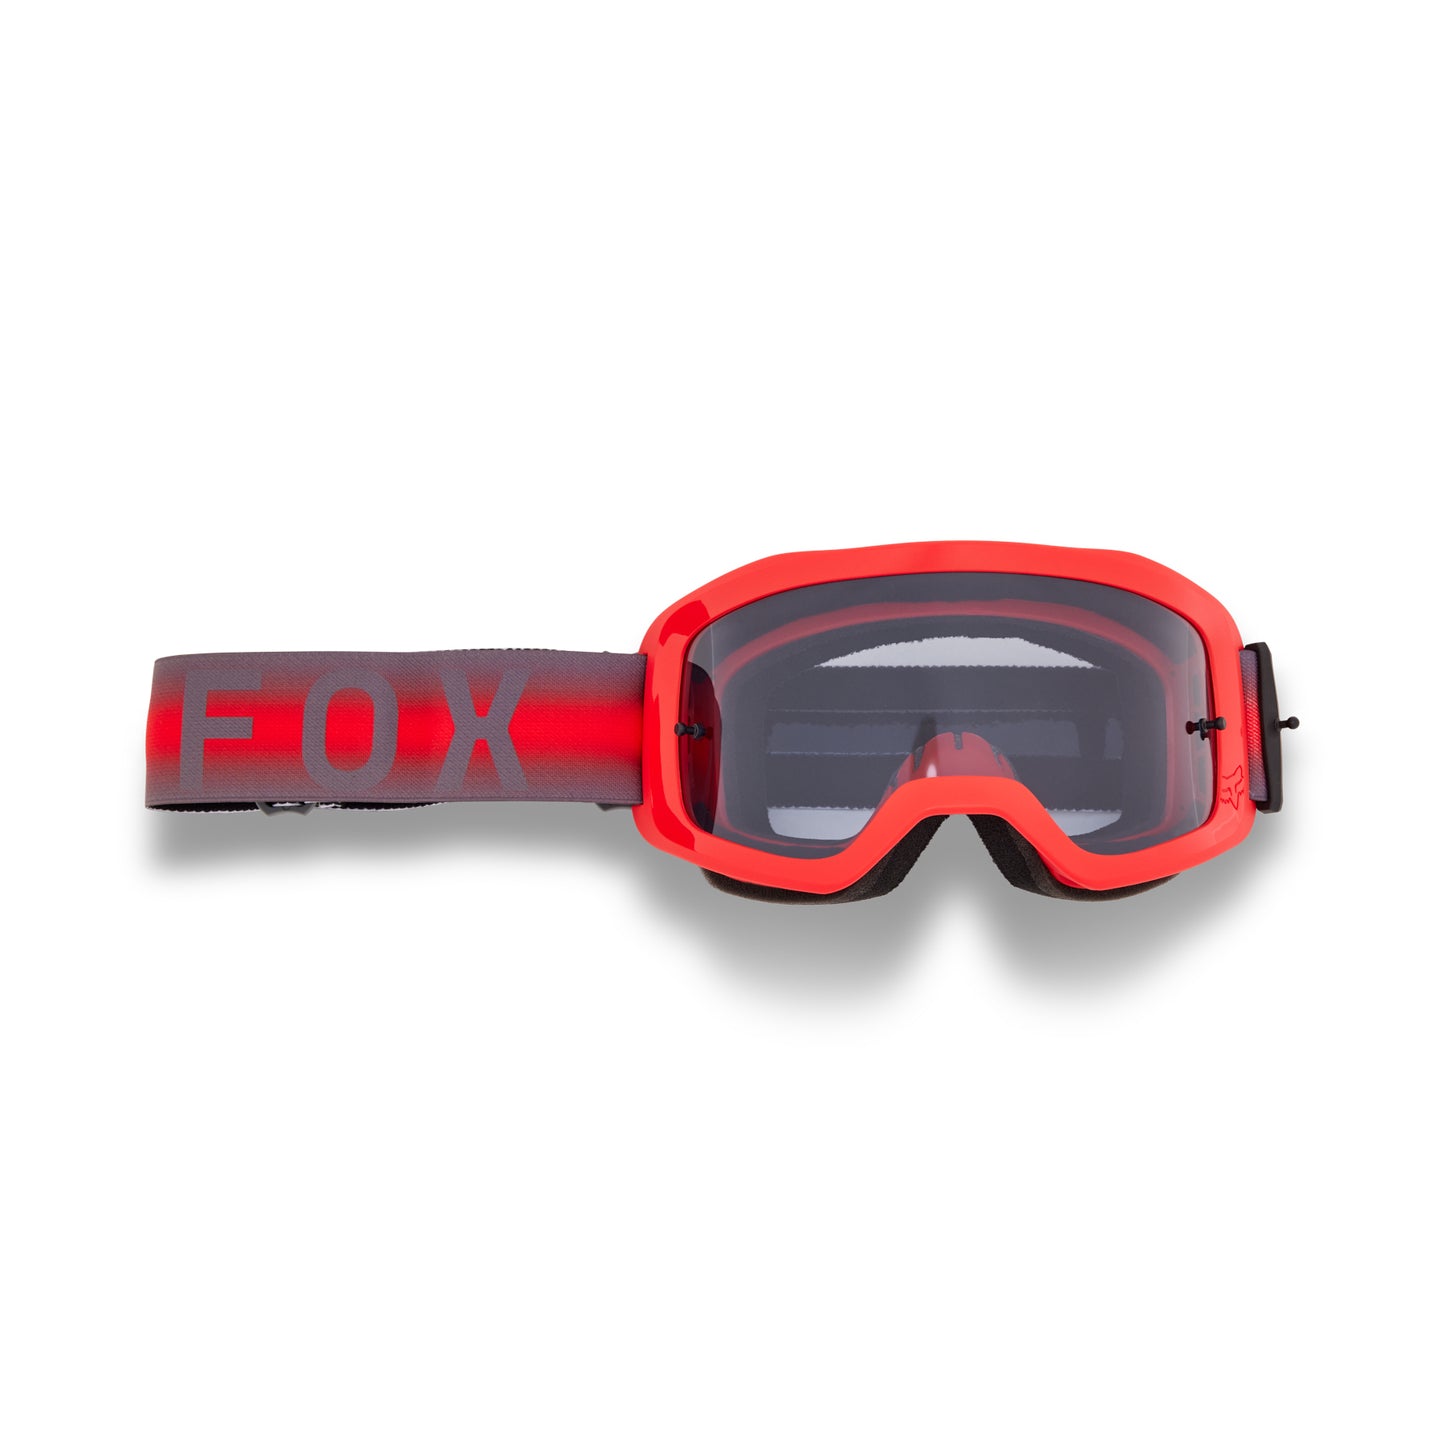 Fox Main Interfere Goggles - One Size Fits Most - Flo Red - Smoke Grey Lens - Image 1